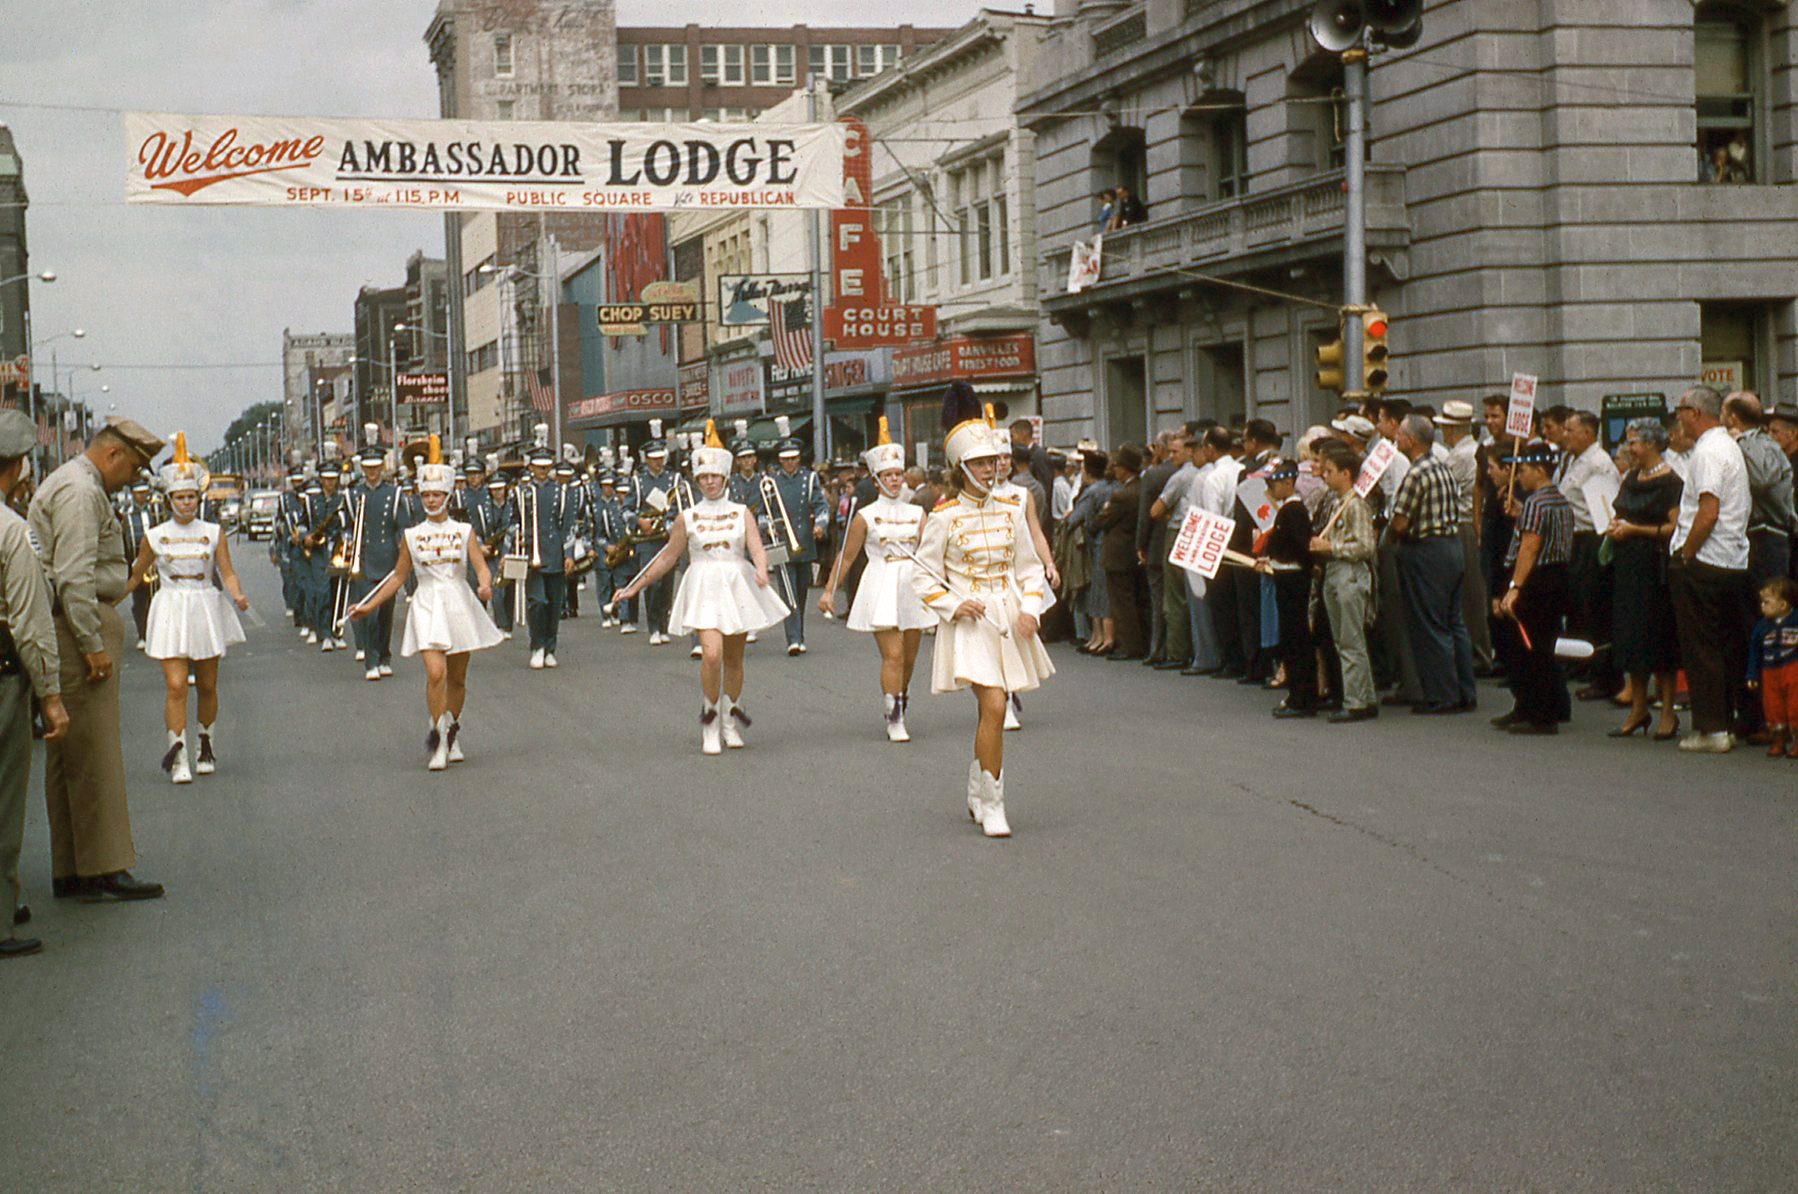 A 1960 parade welcoming Republican vice presidential candidate Henry Cabot Lodge Jr. to Danville, Illinois. 35mm slide given to me by a friend. View full size.